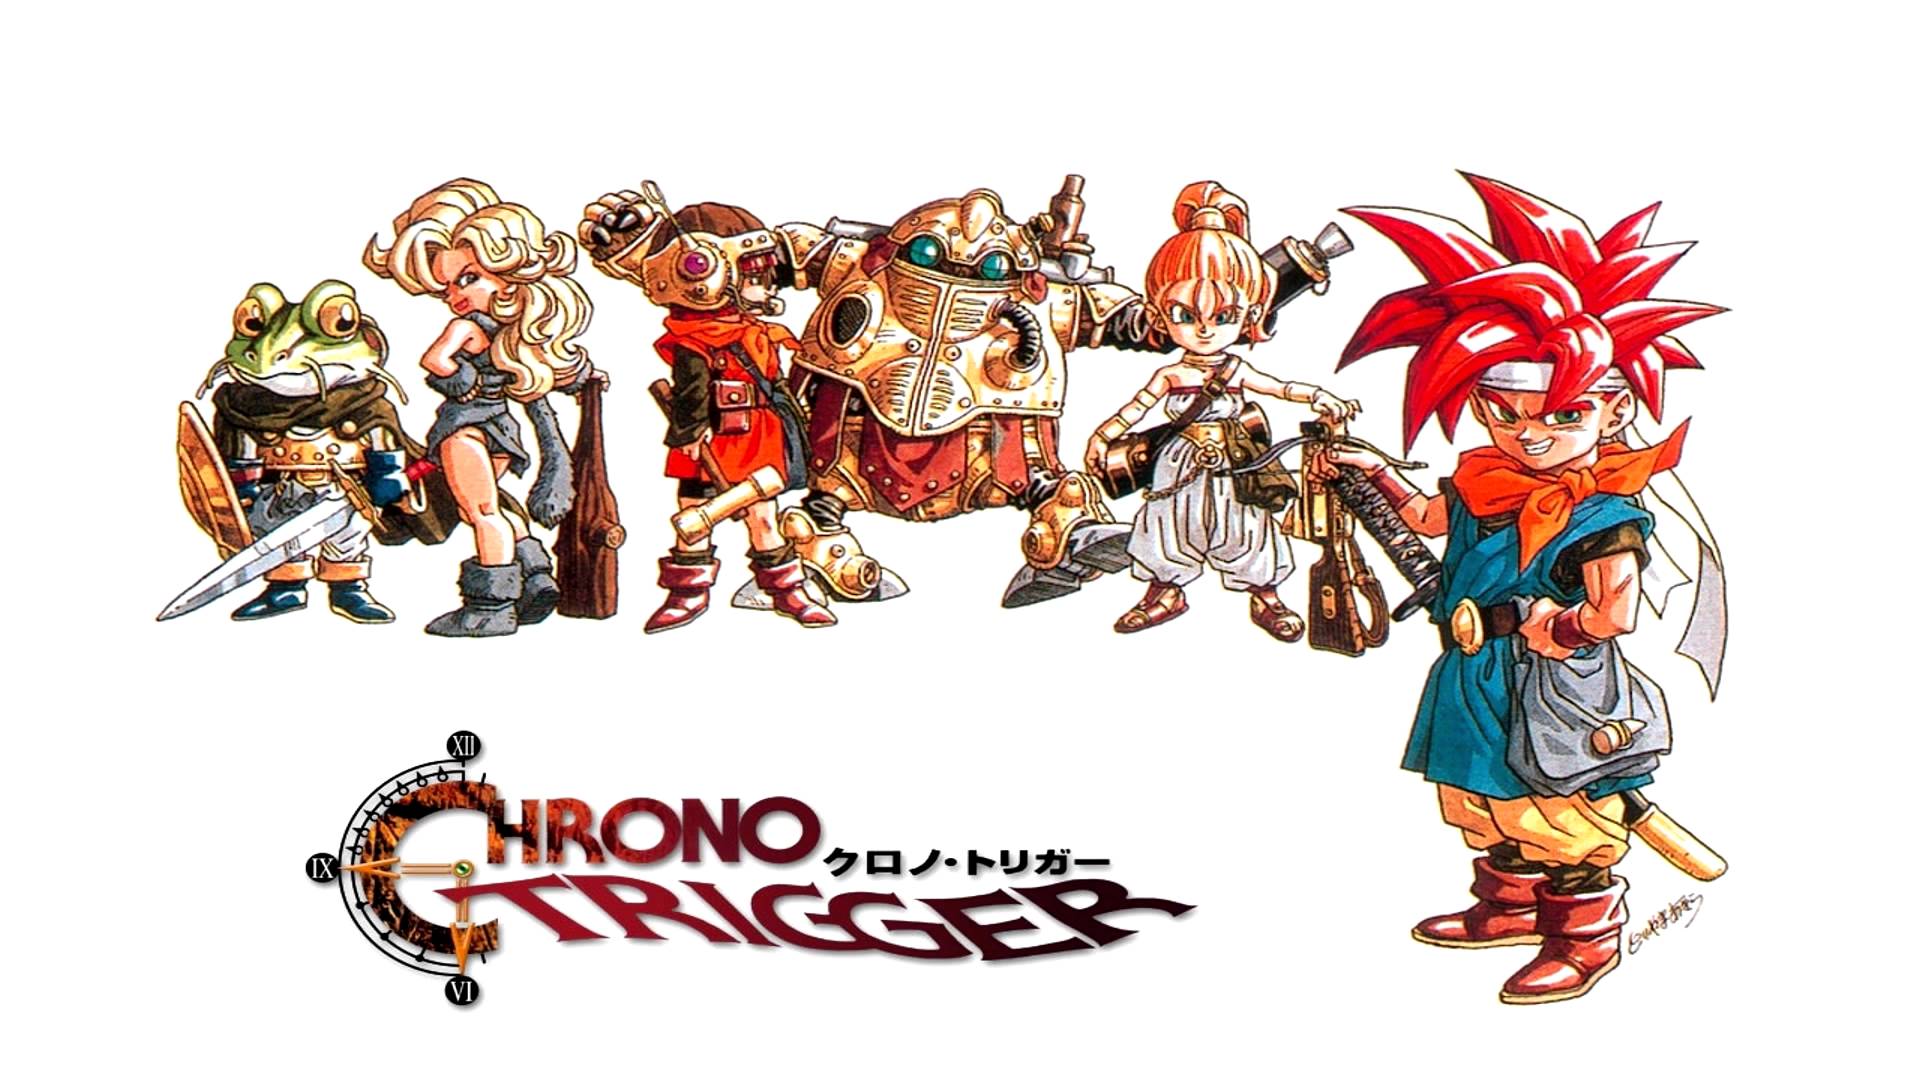 Is Chrono Trigger the best game? 